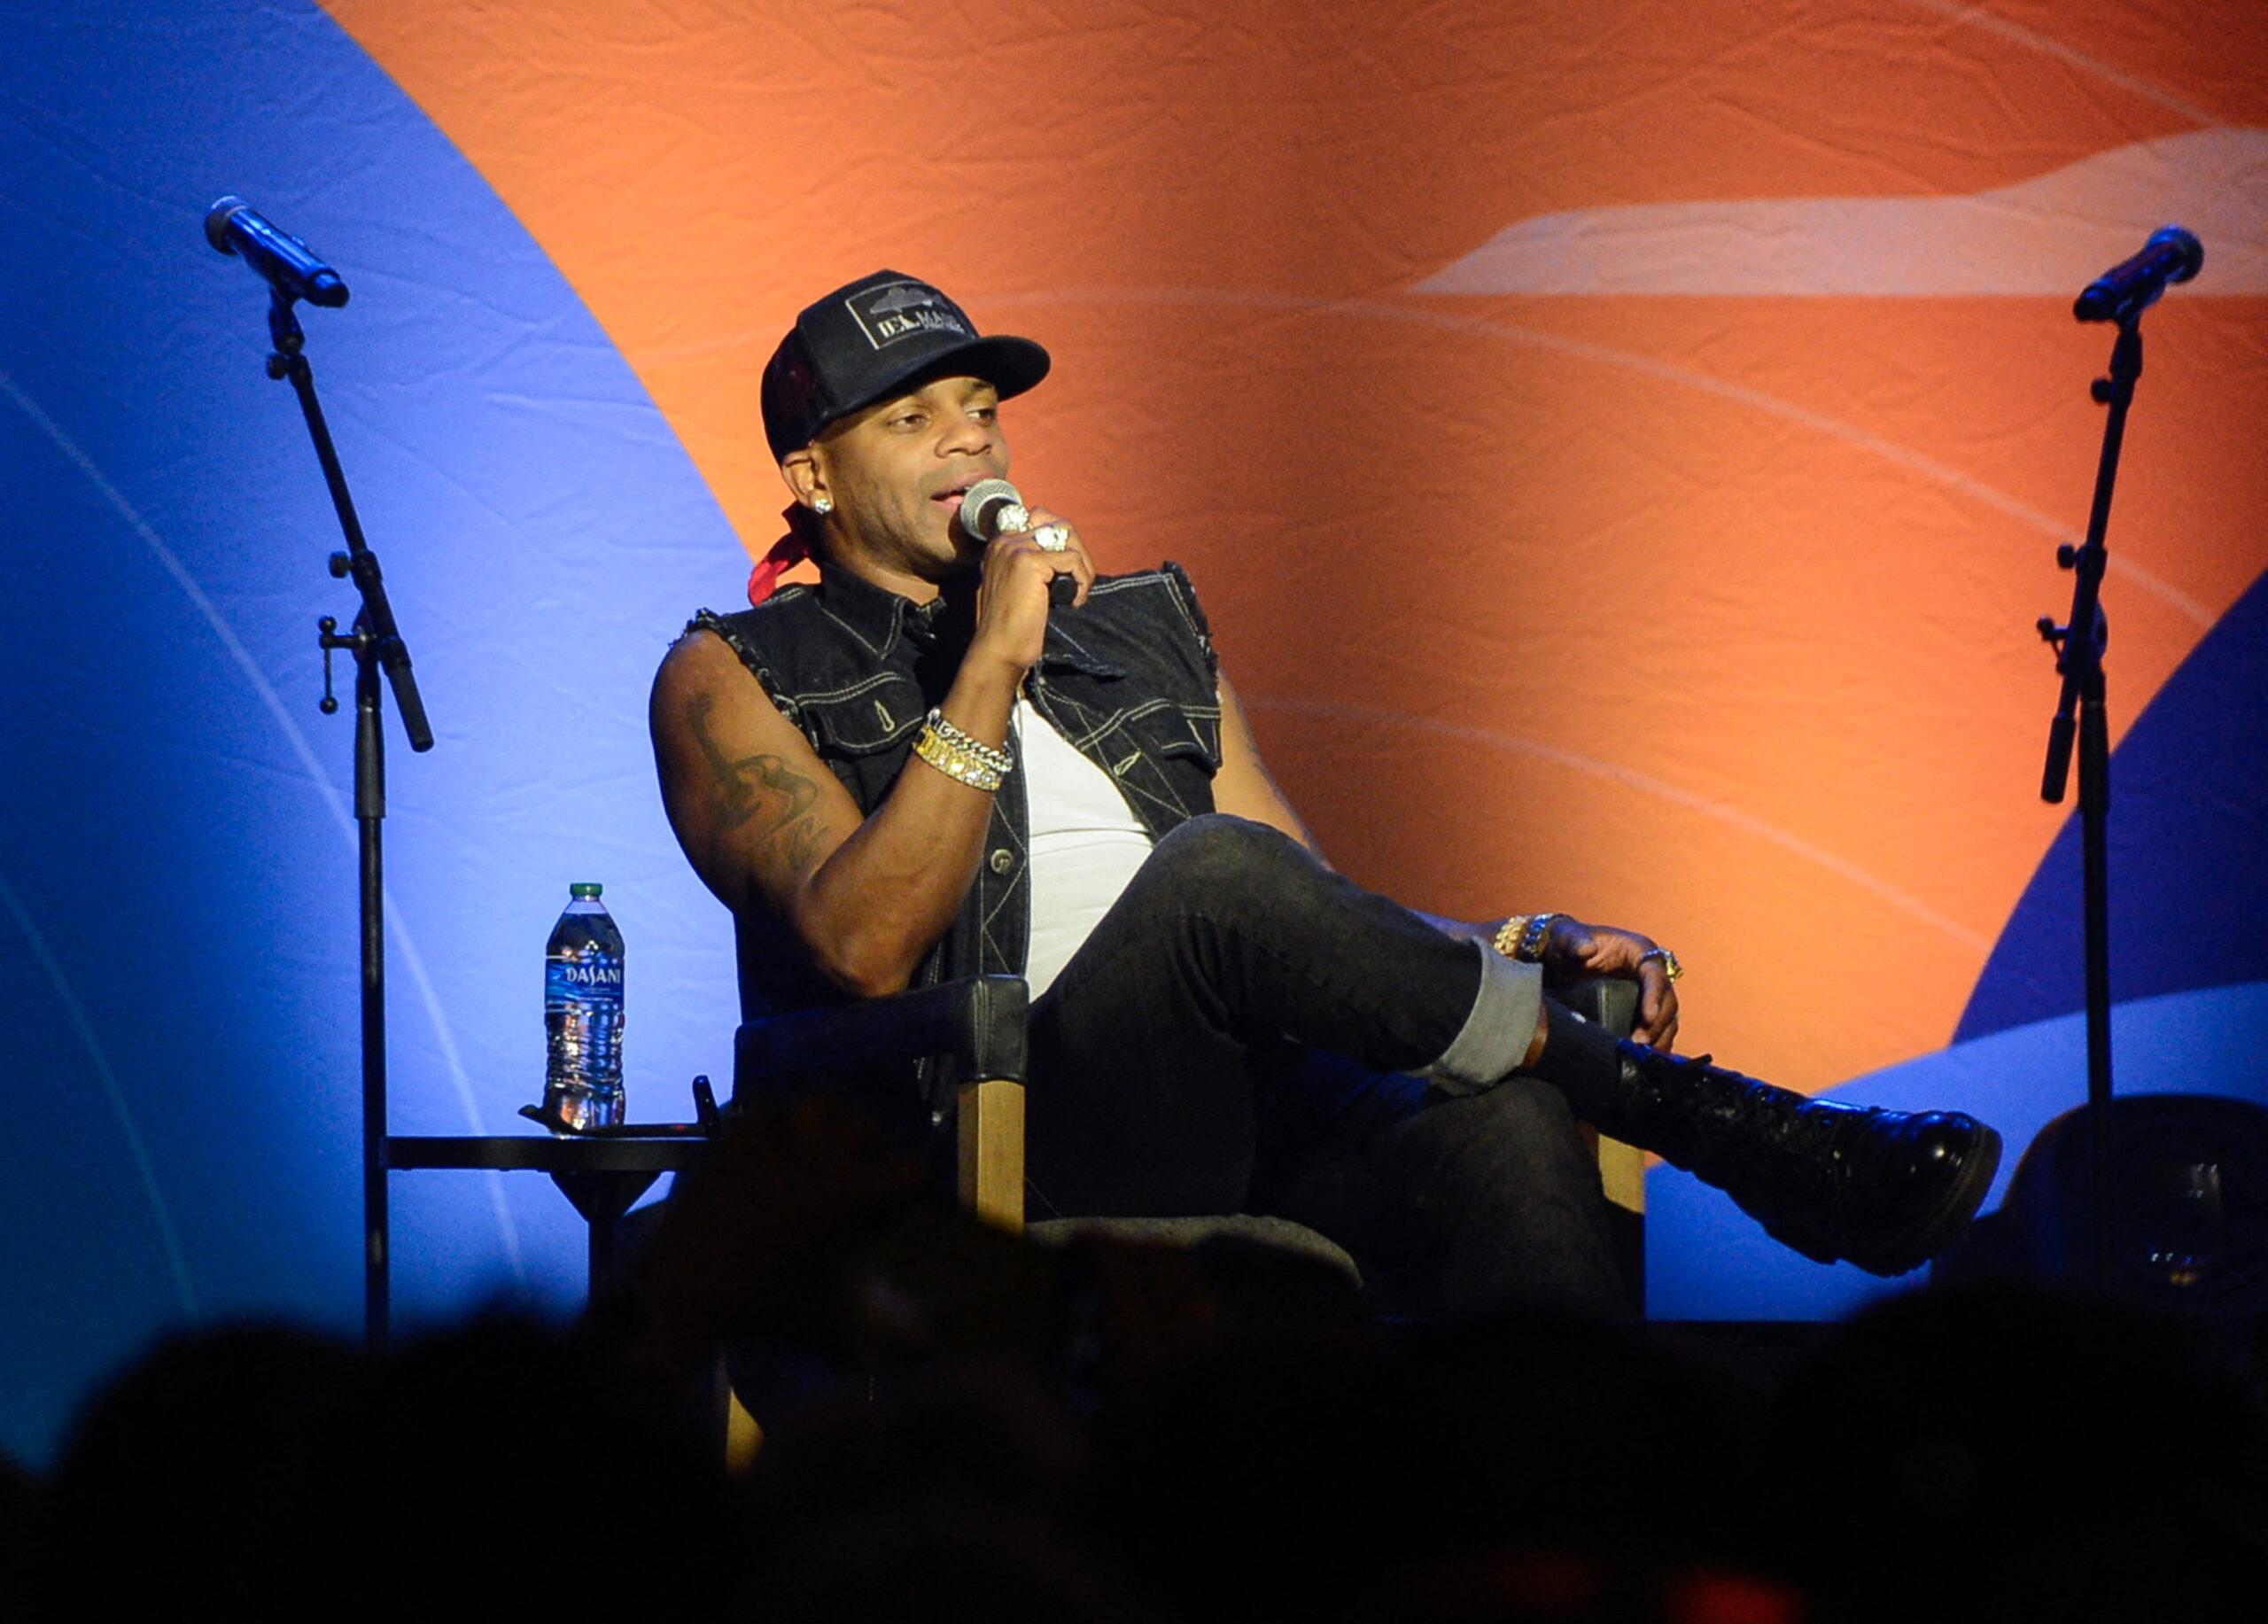 Jimmie Allen at the 2022 CMA Music Festival - Day 1